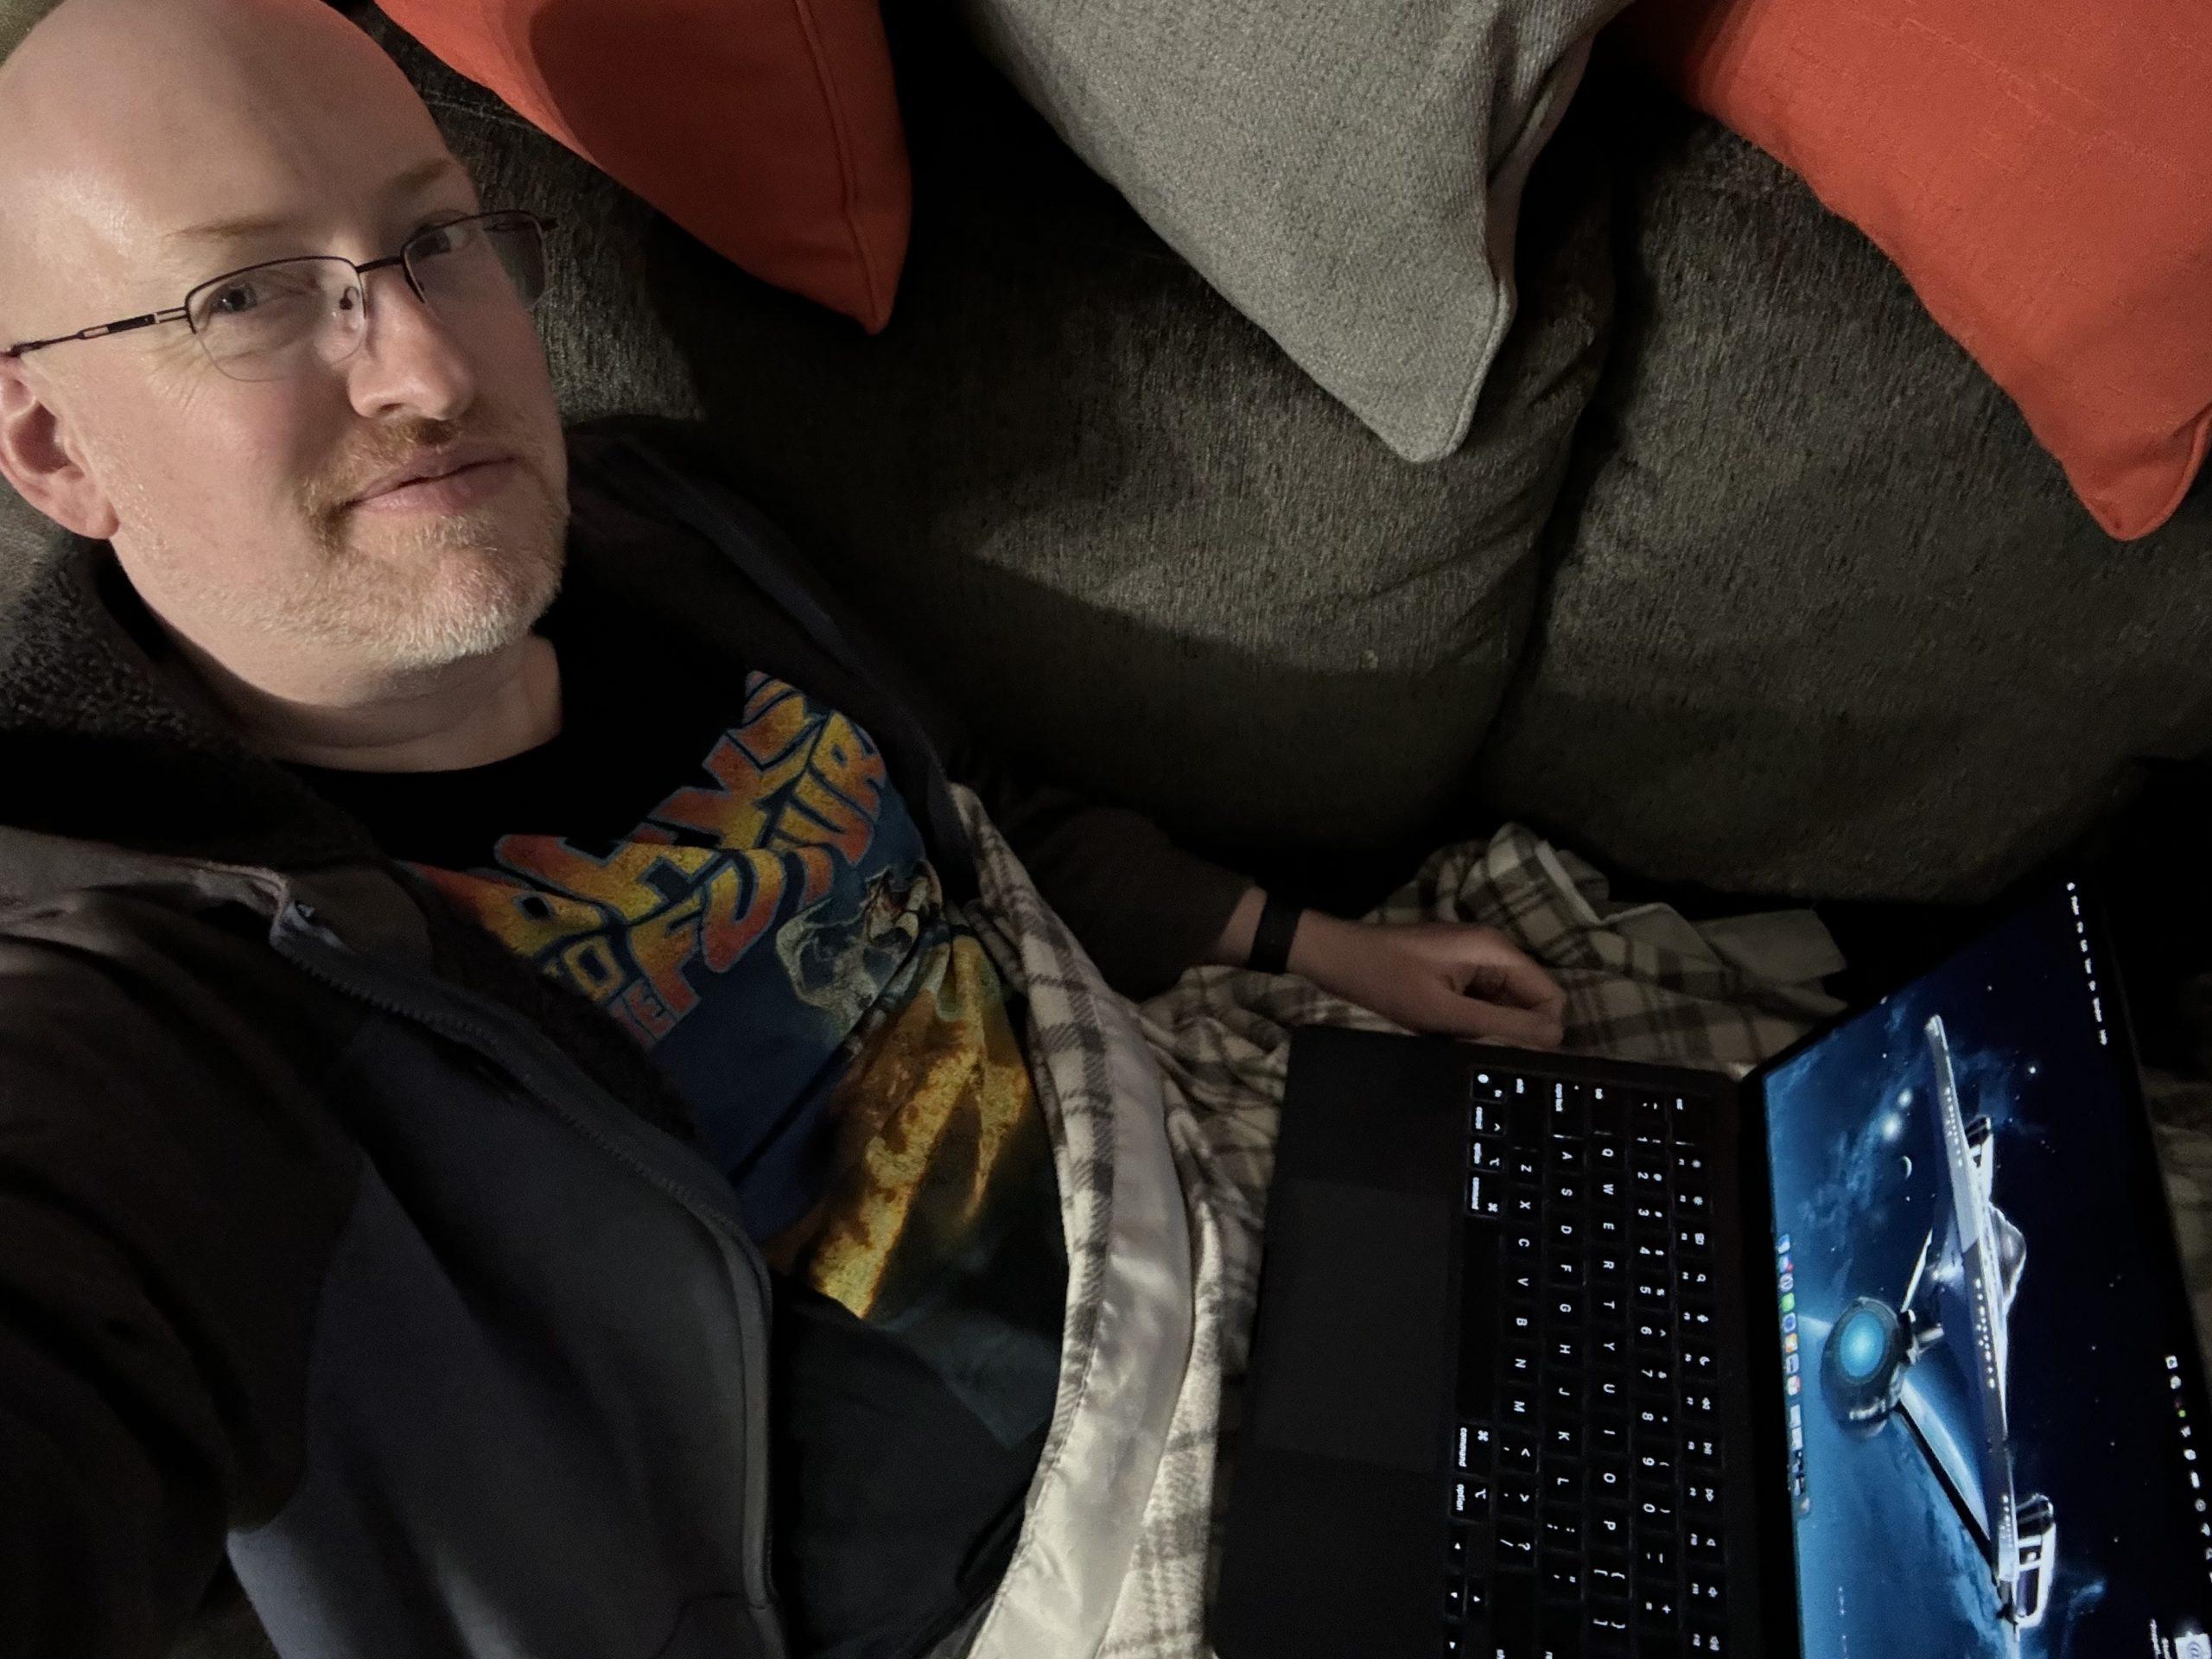 Me sitting on our couch with my computer on my lap. A desktop image of the orignal series USS Enterprise is visible on the screen.